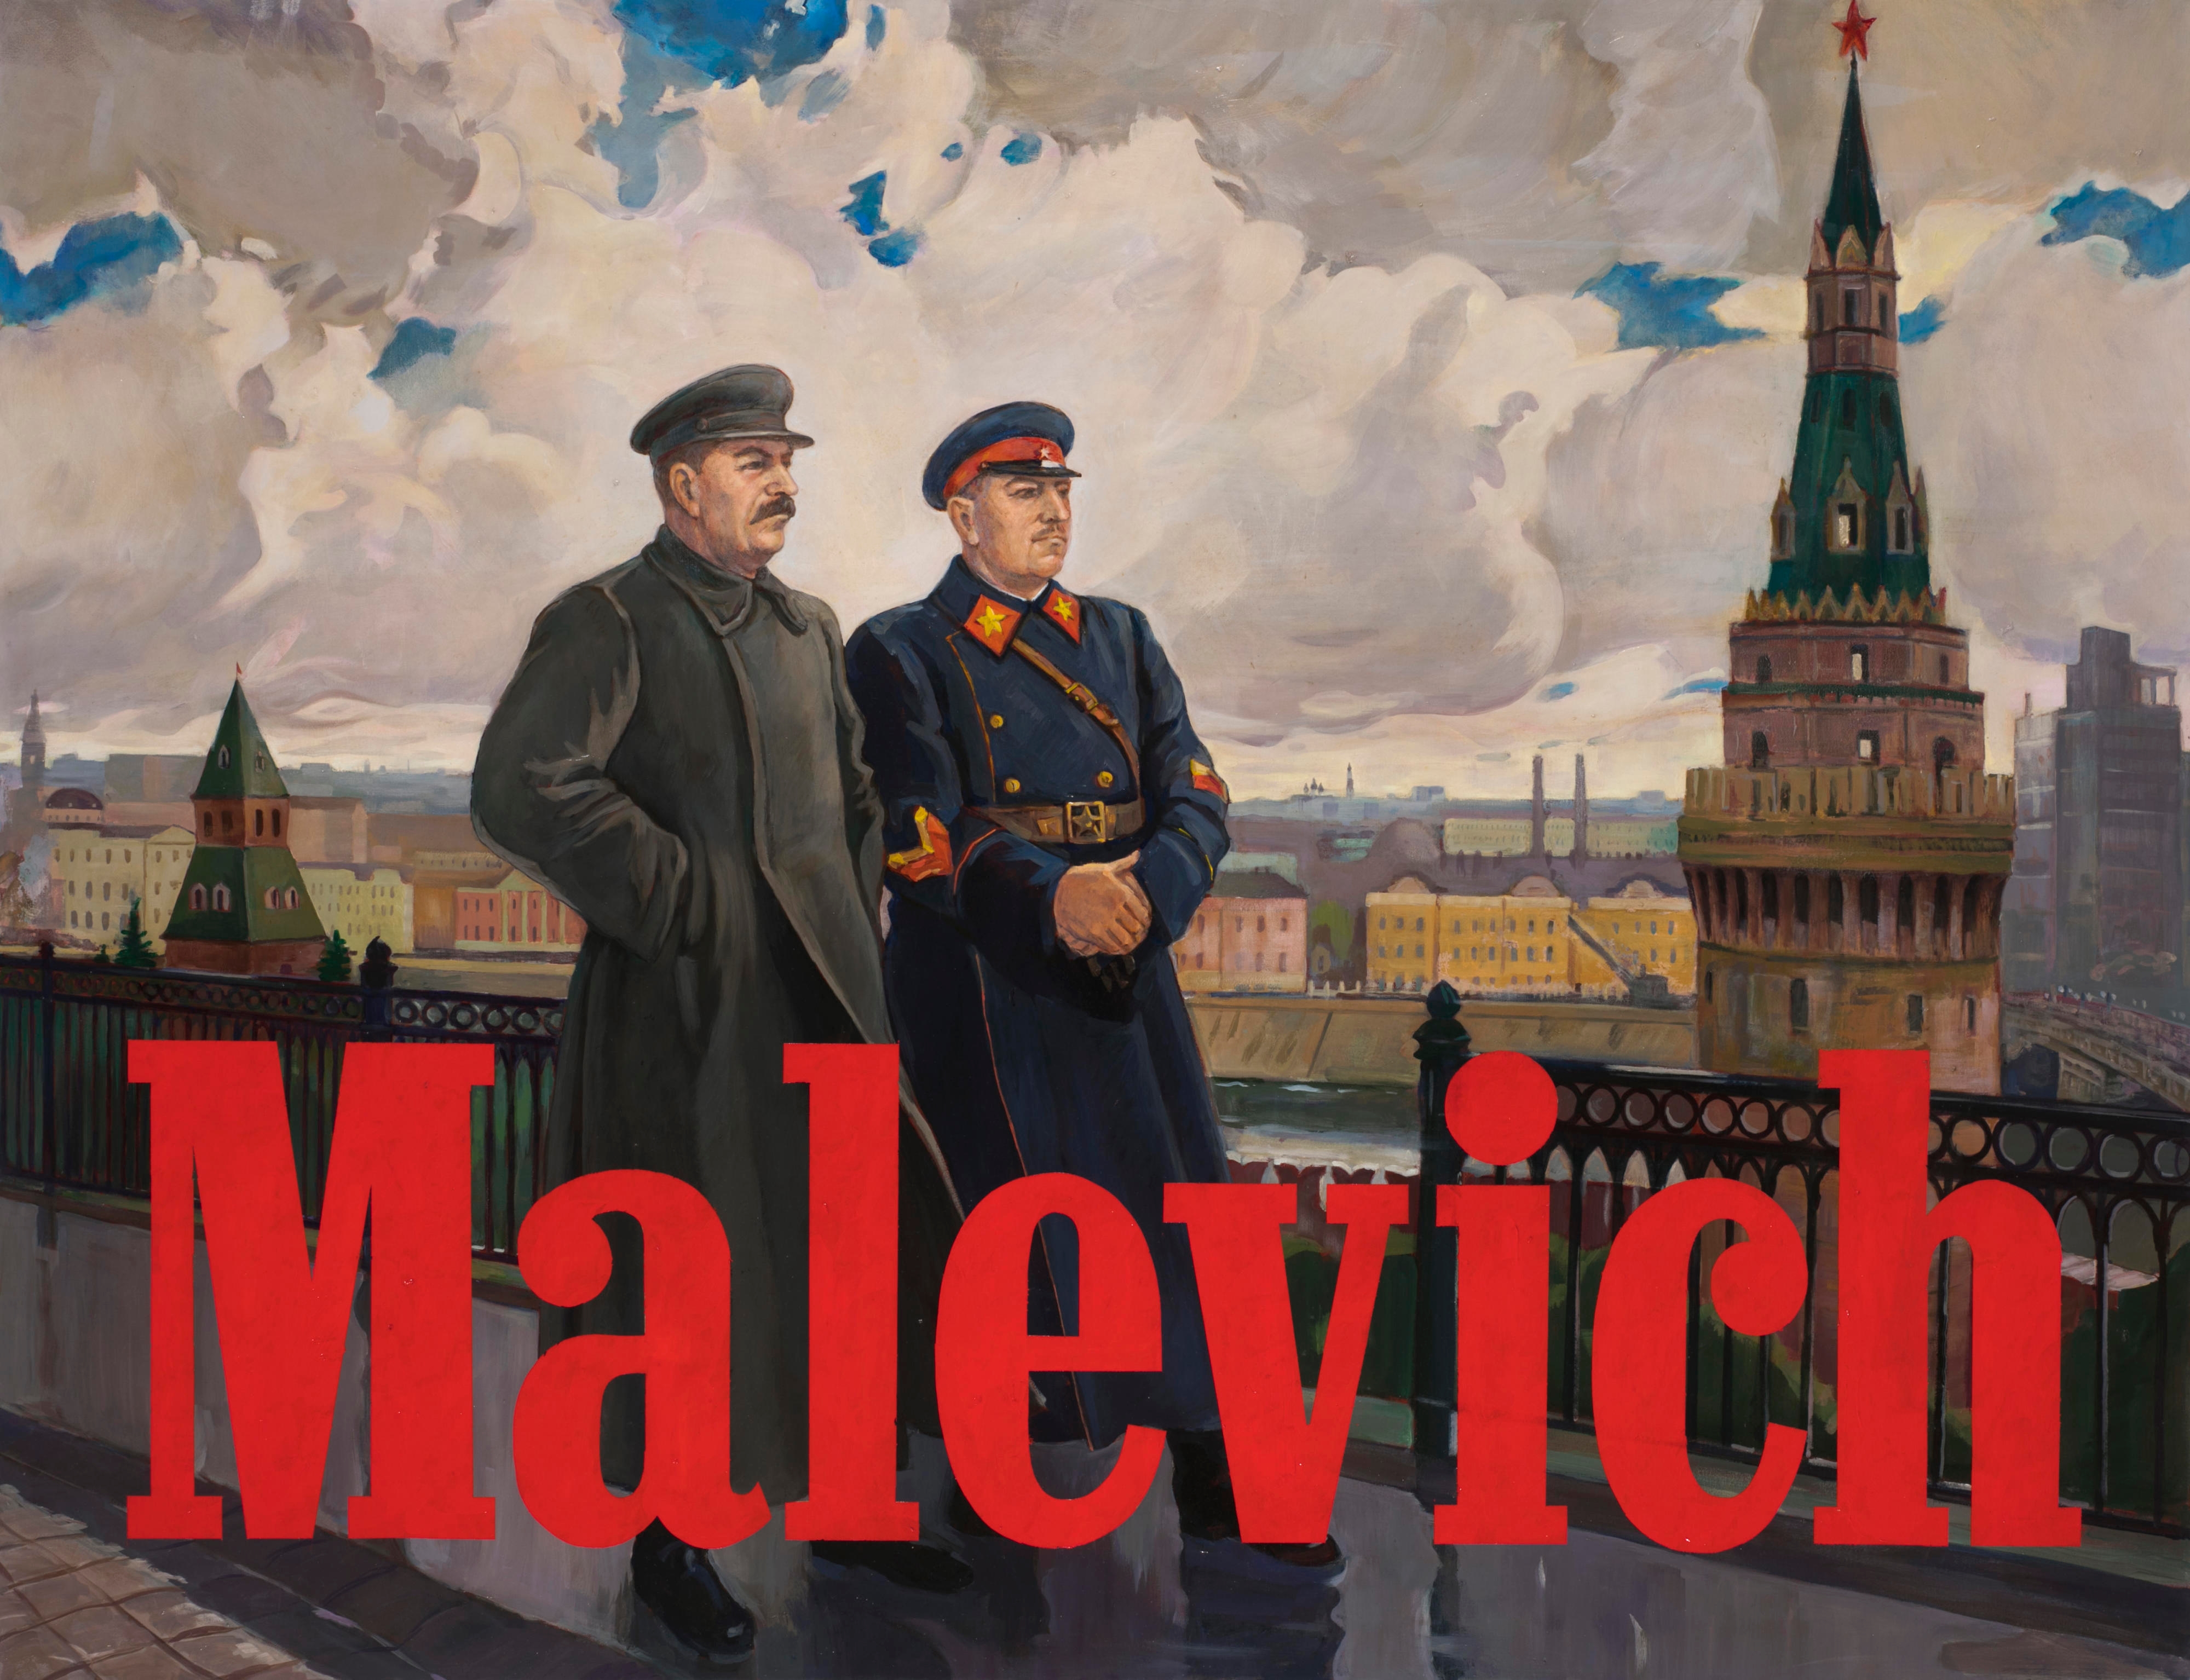 Artwork by Alexander Kosolapov, The country of Malevich, Made of oil on canvas